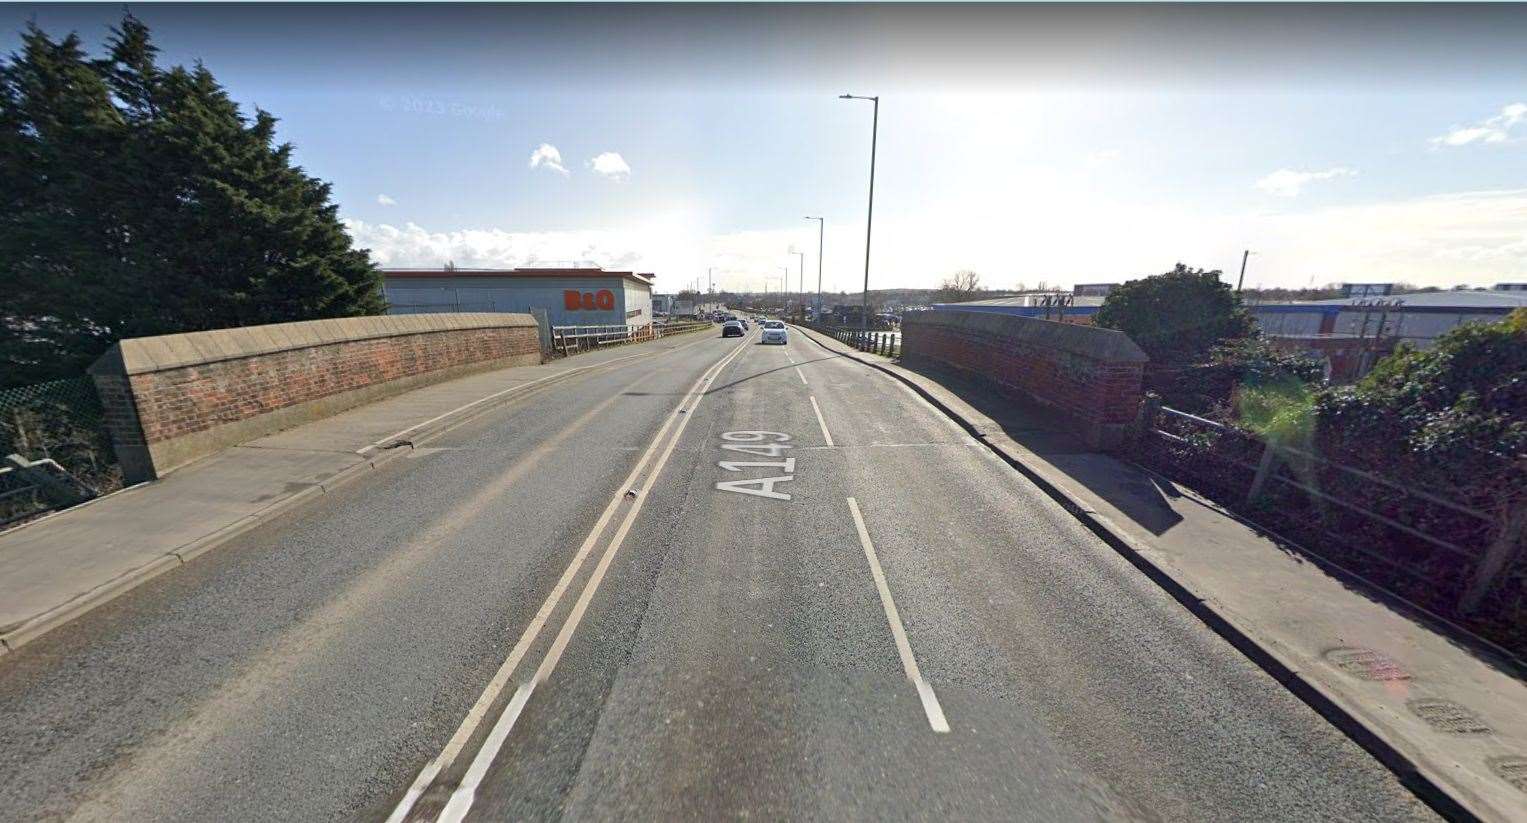 The roadworks have been put in place on Hardwick Road in Lynn. Picture: Google Maps